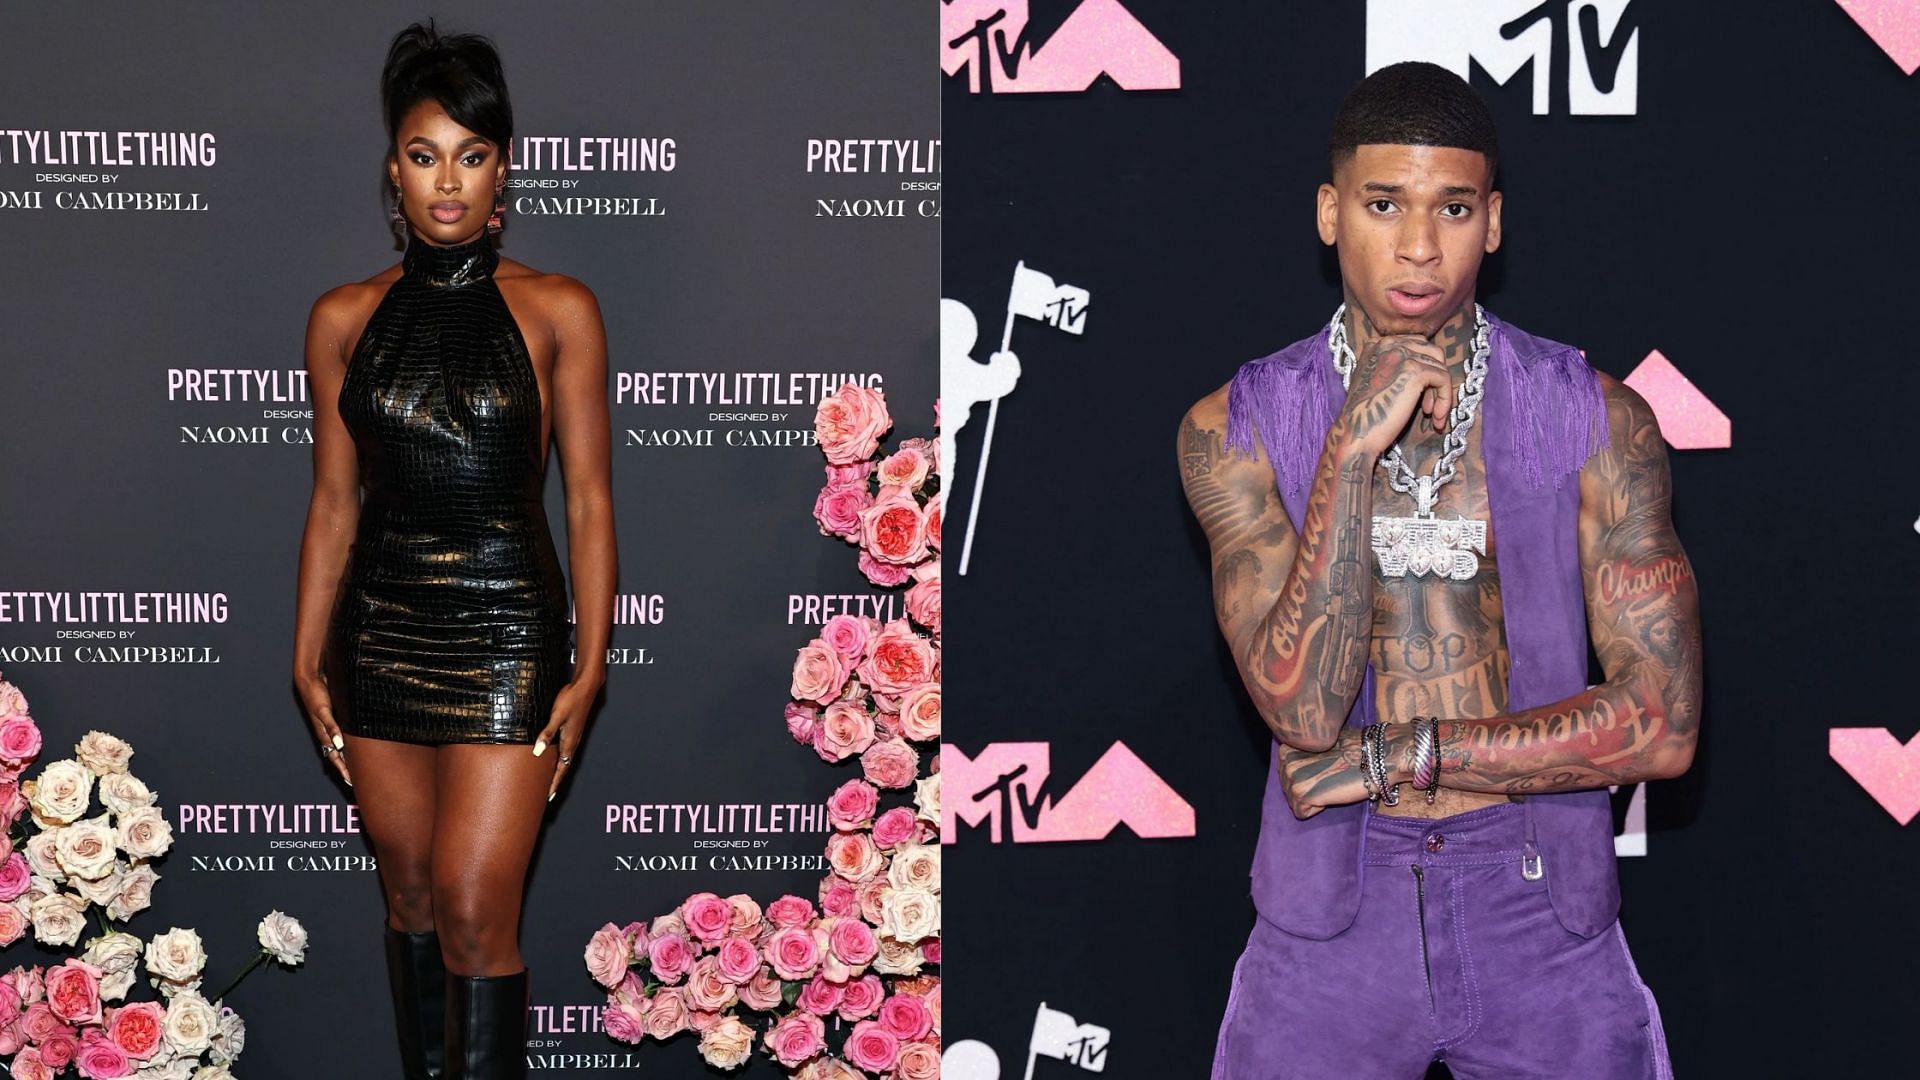 Internet reacts to NLE Choppa grinning when Coco Jones went up to him (Image via Getty Images)